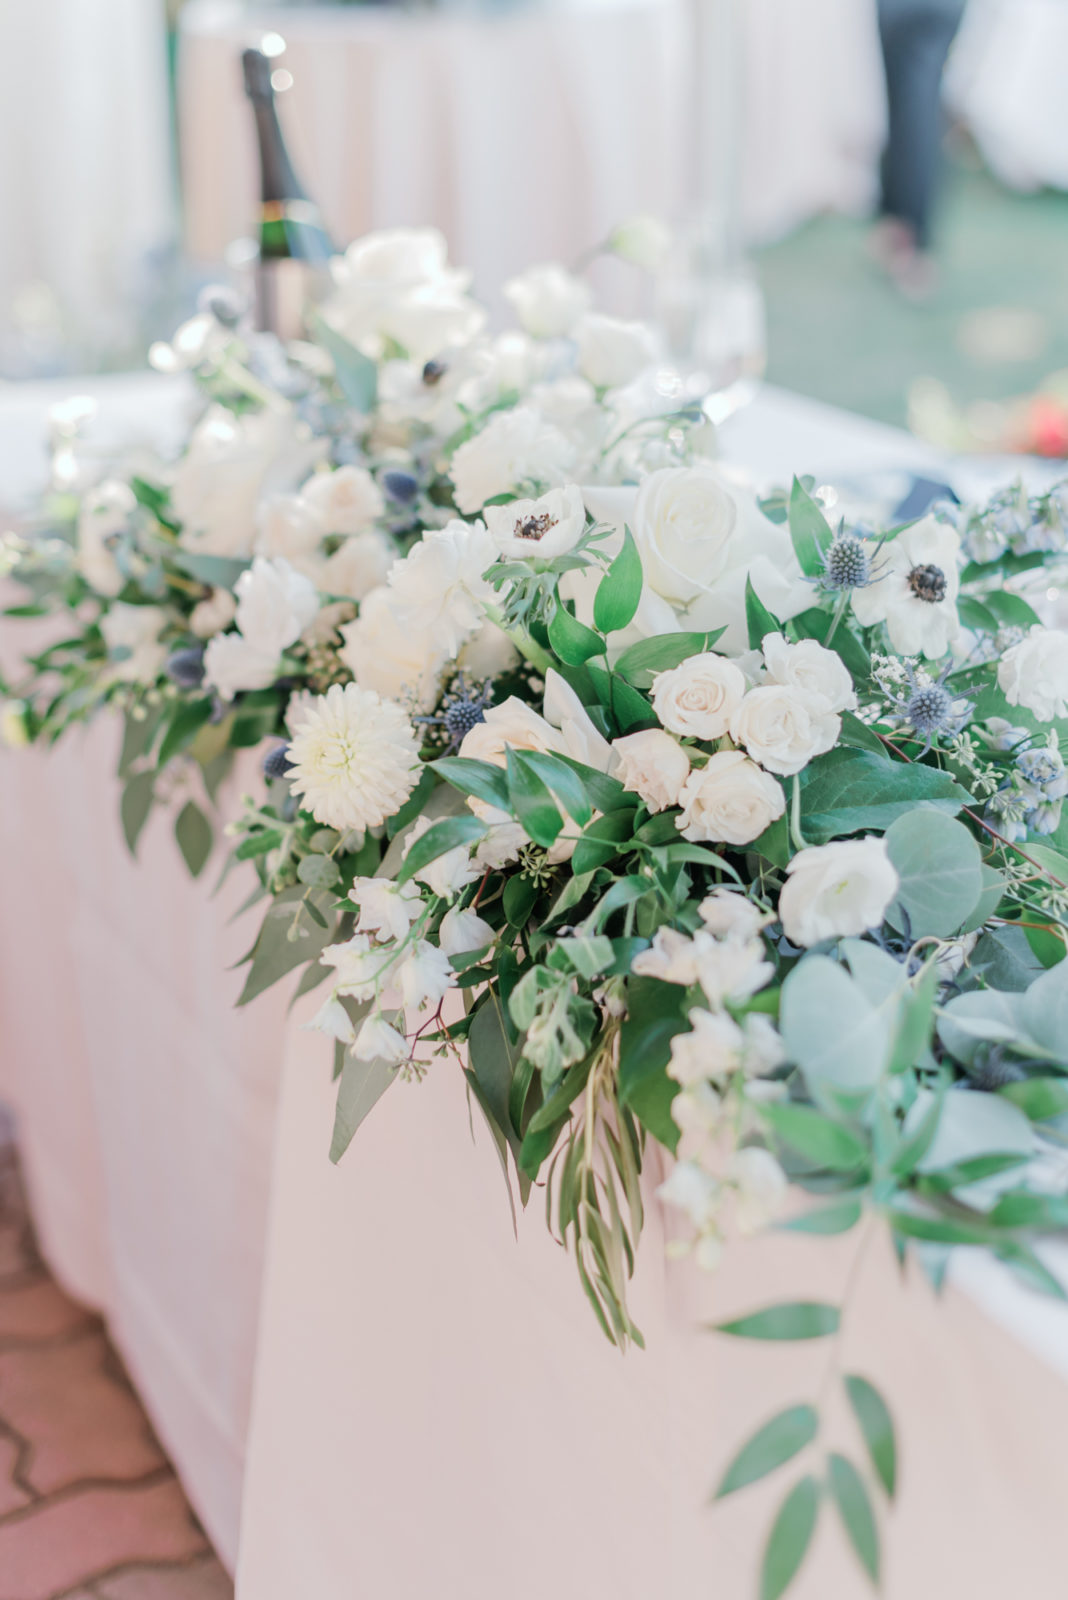 White and pale blue blooms for wedding reception floral arrangement